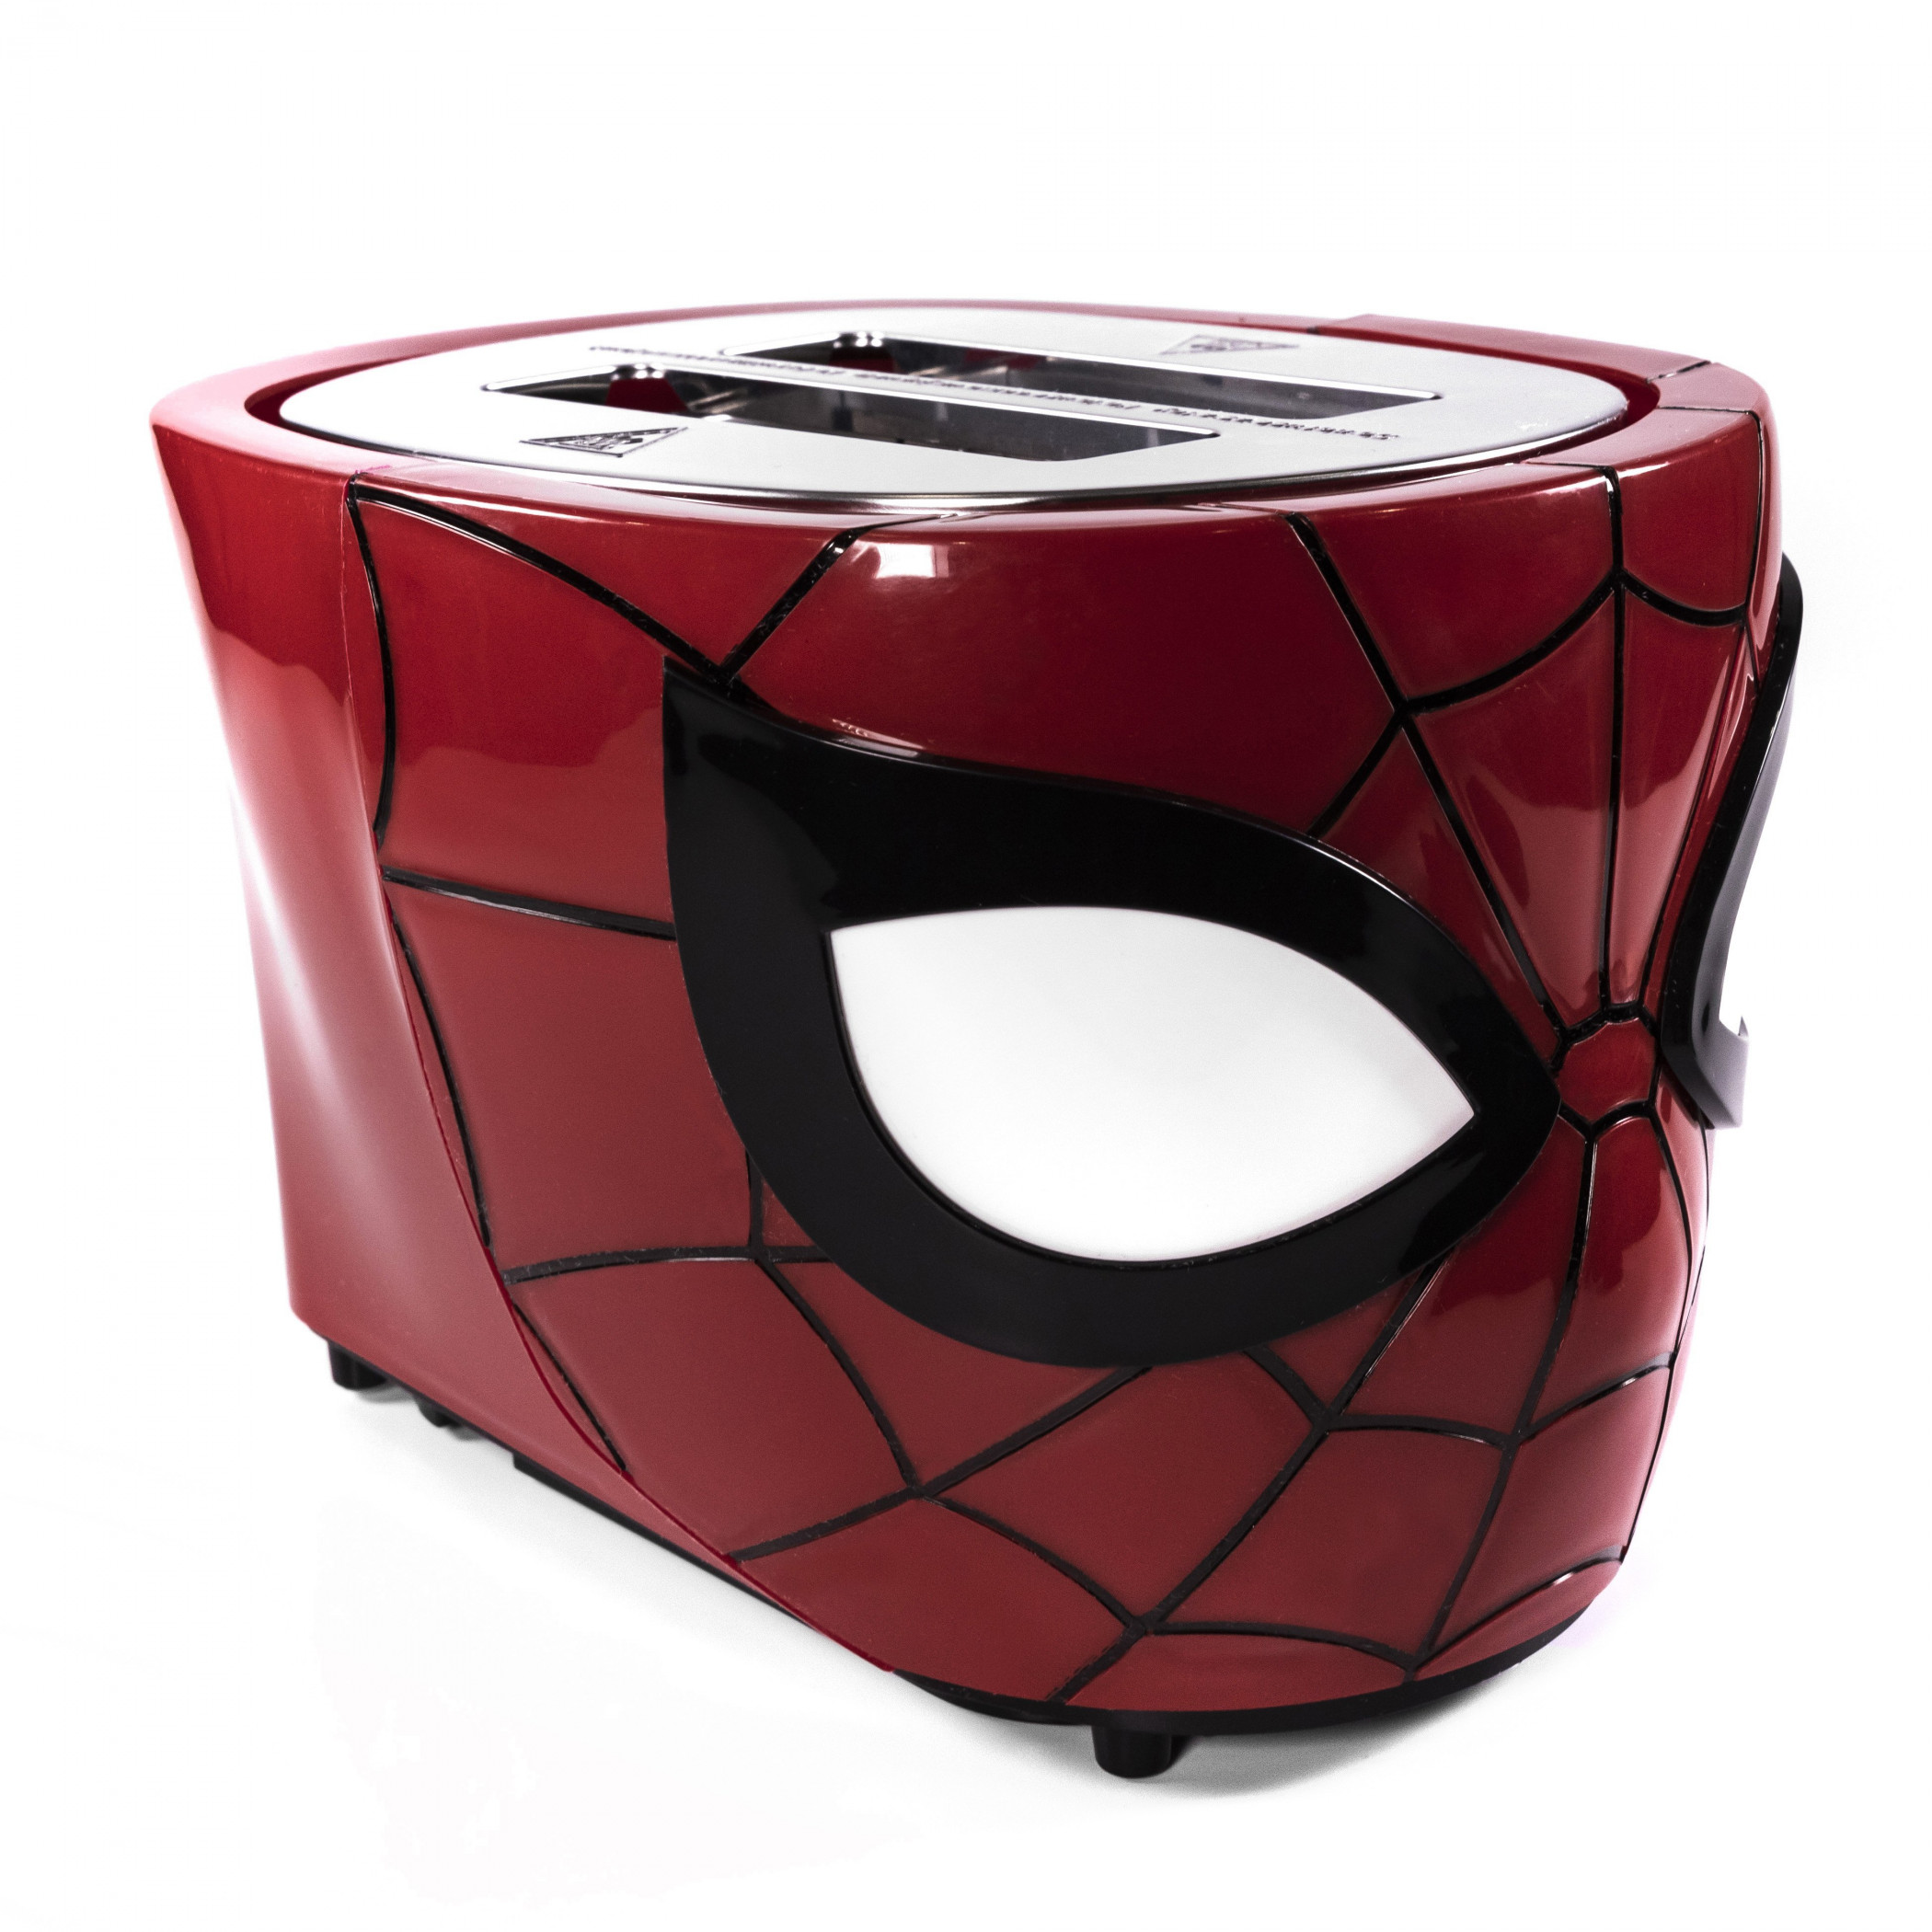 Spider-Man Halo Toasters With Lights and Sounds